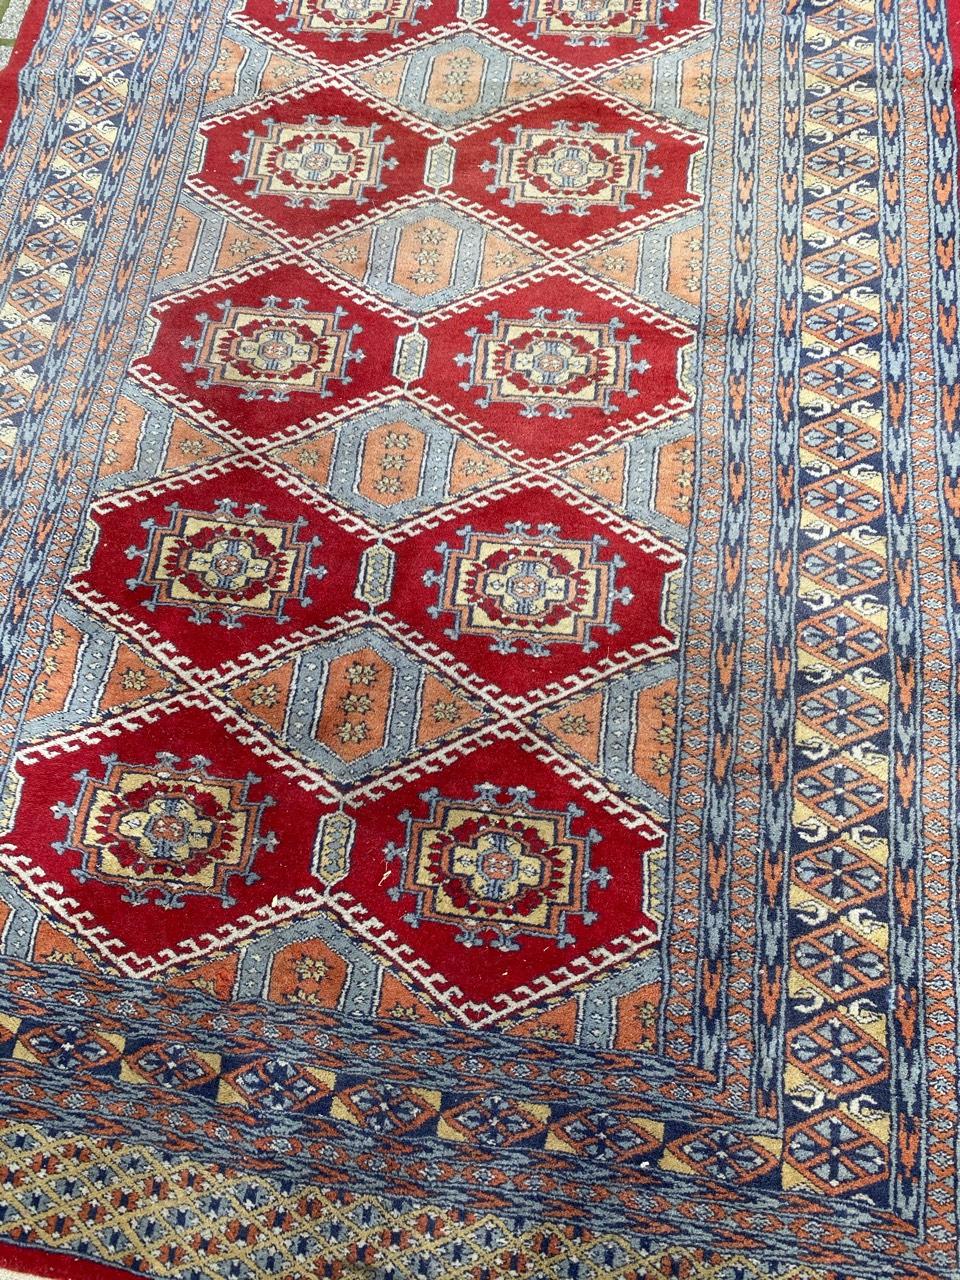 Nice 20th century rug with a Turkmen design and beautiful colors with red, orange and blue, entirely and finely hand knotted with wool velvet on cotton foundation.

✨✨✨
